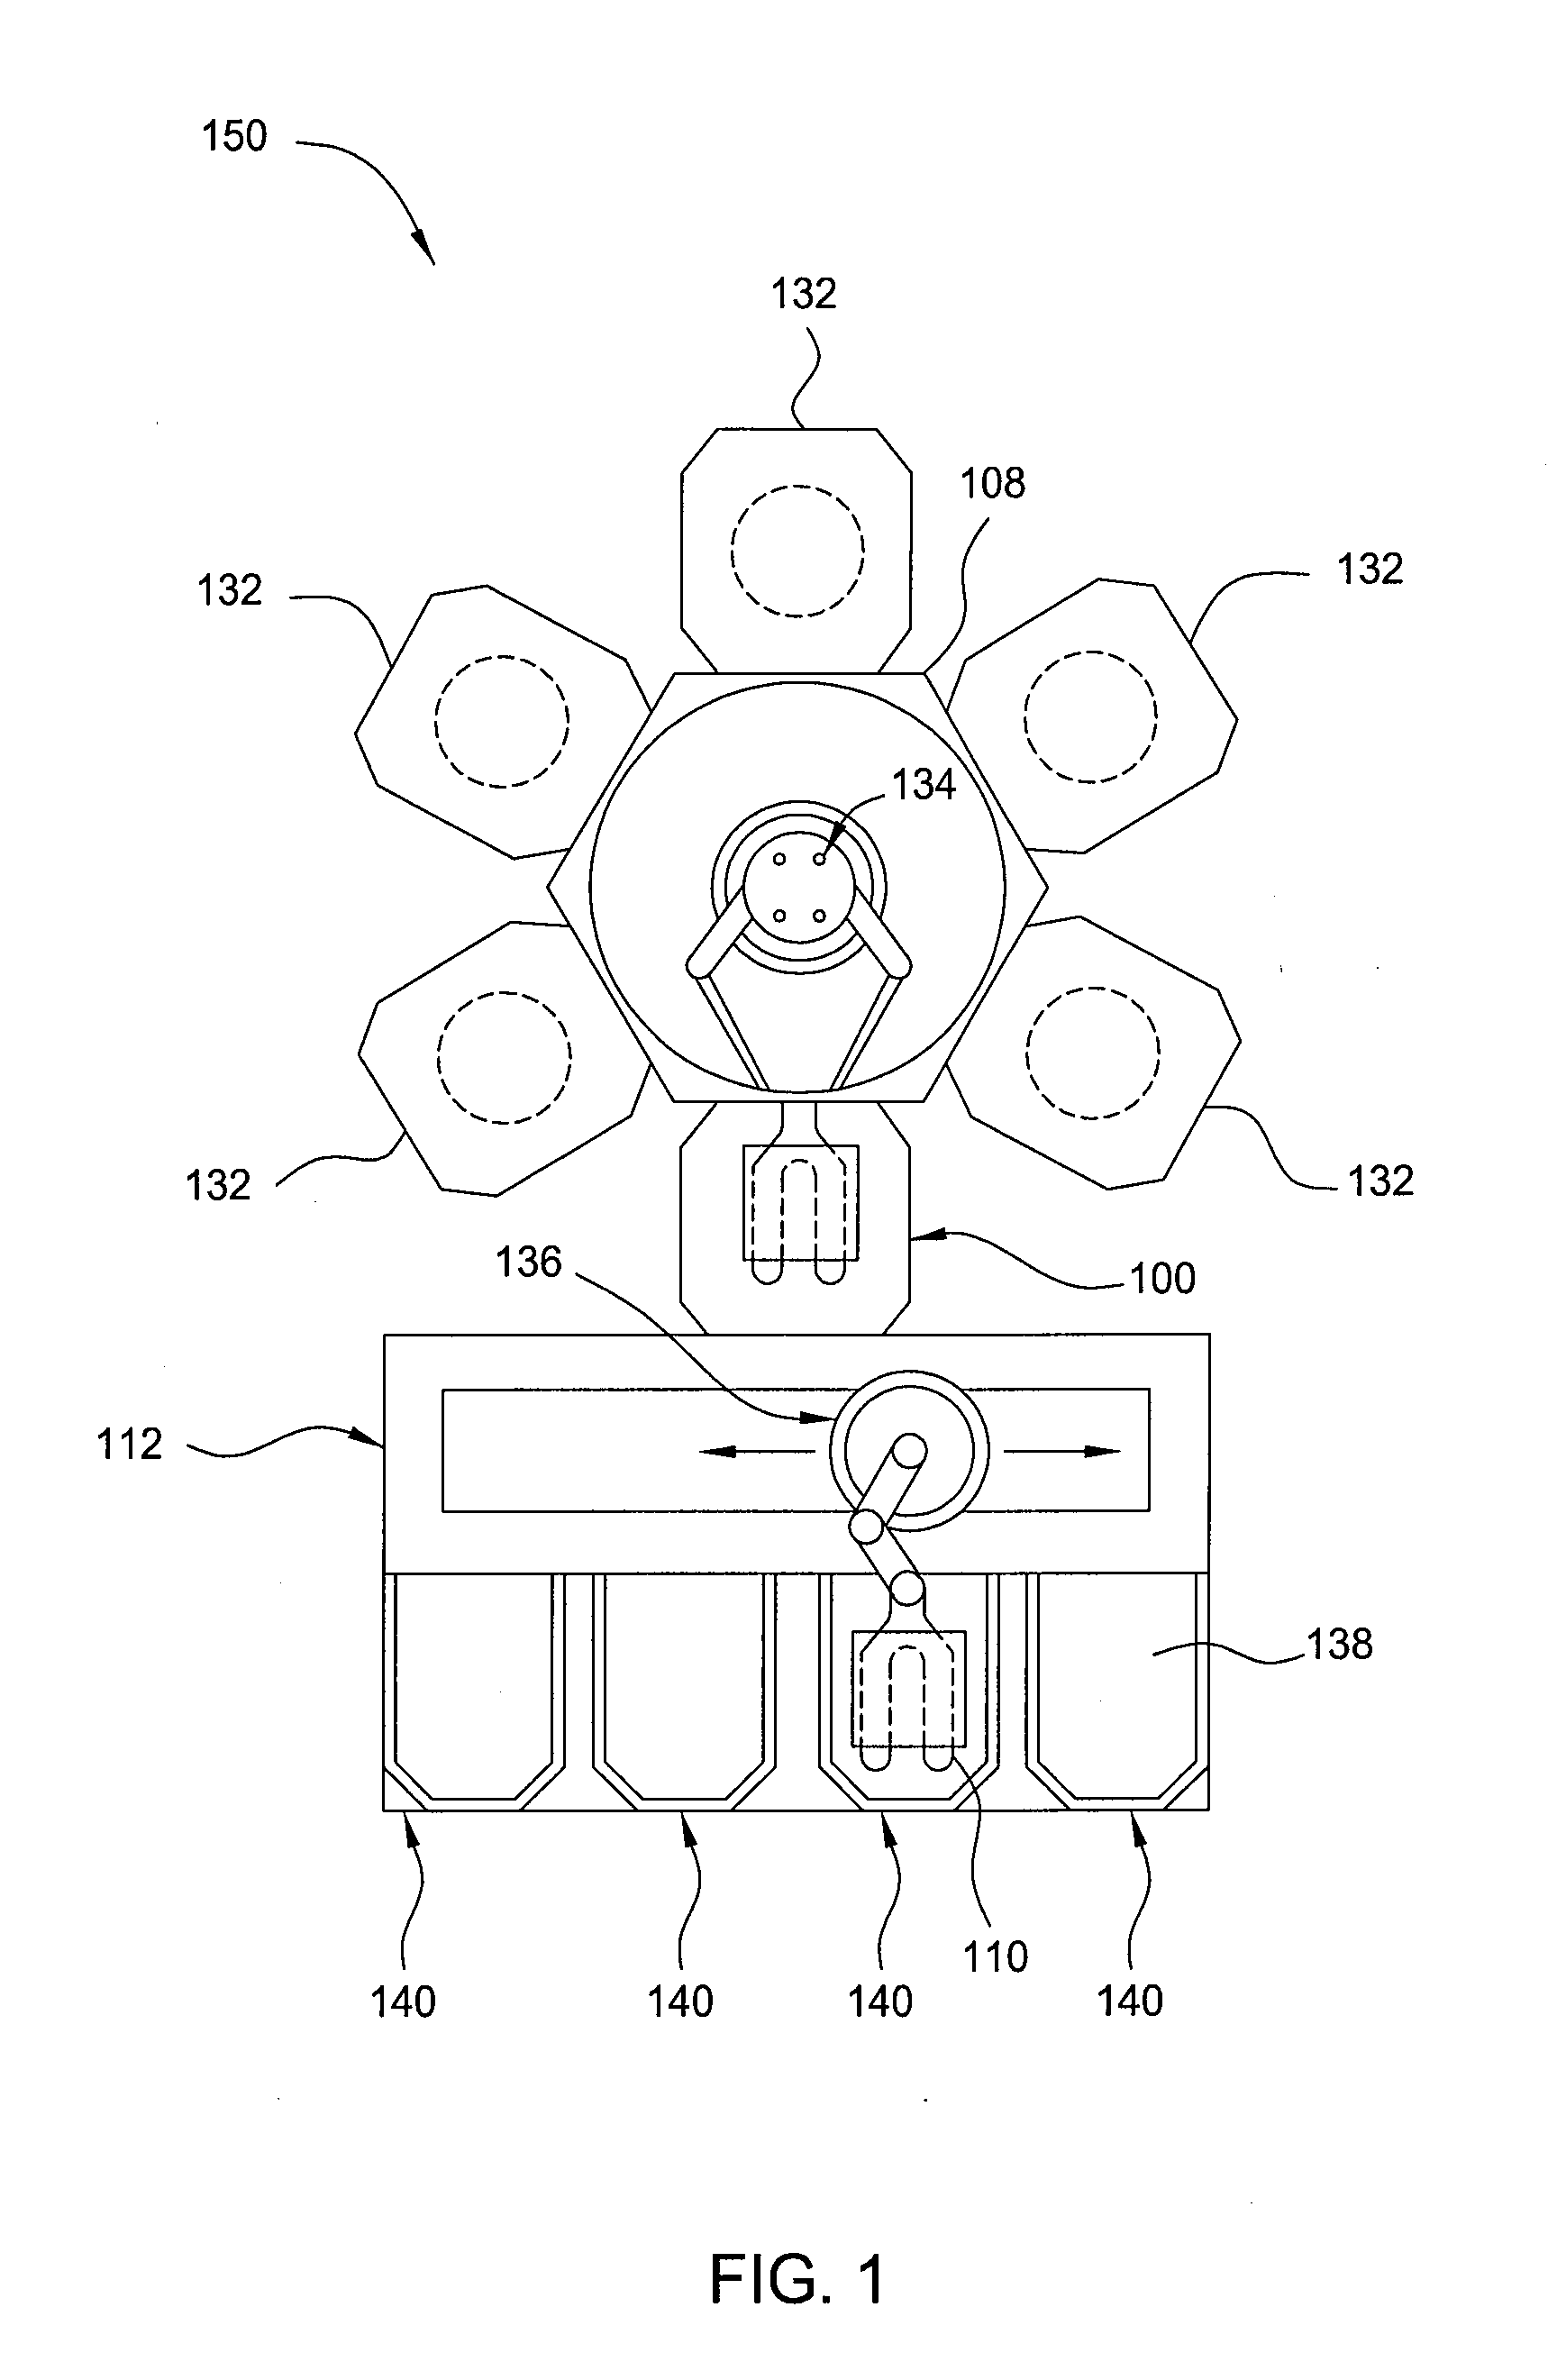 Load lock chamber for large area substrate processing system